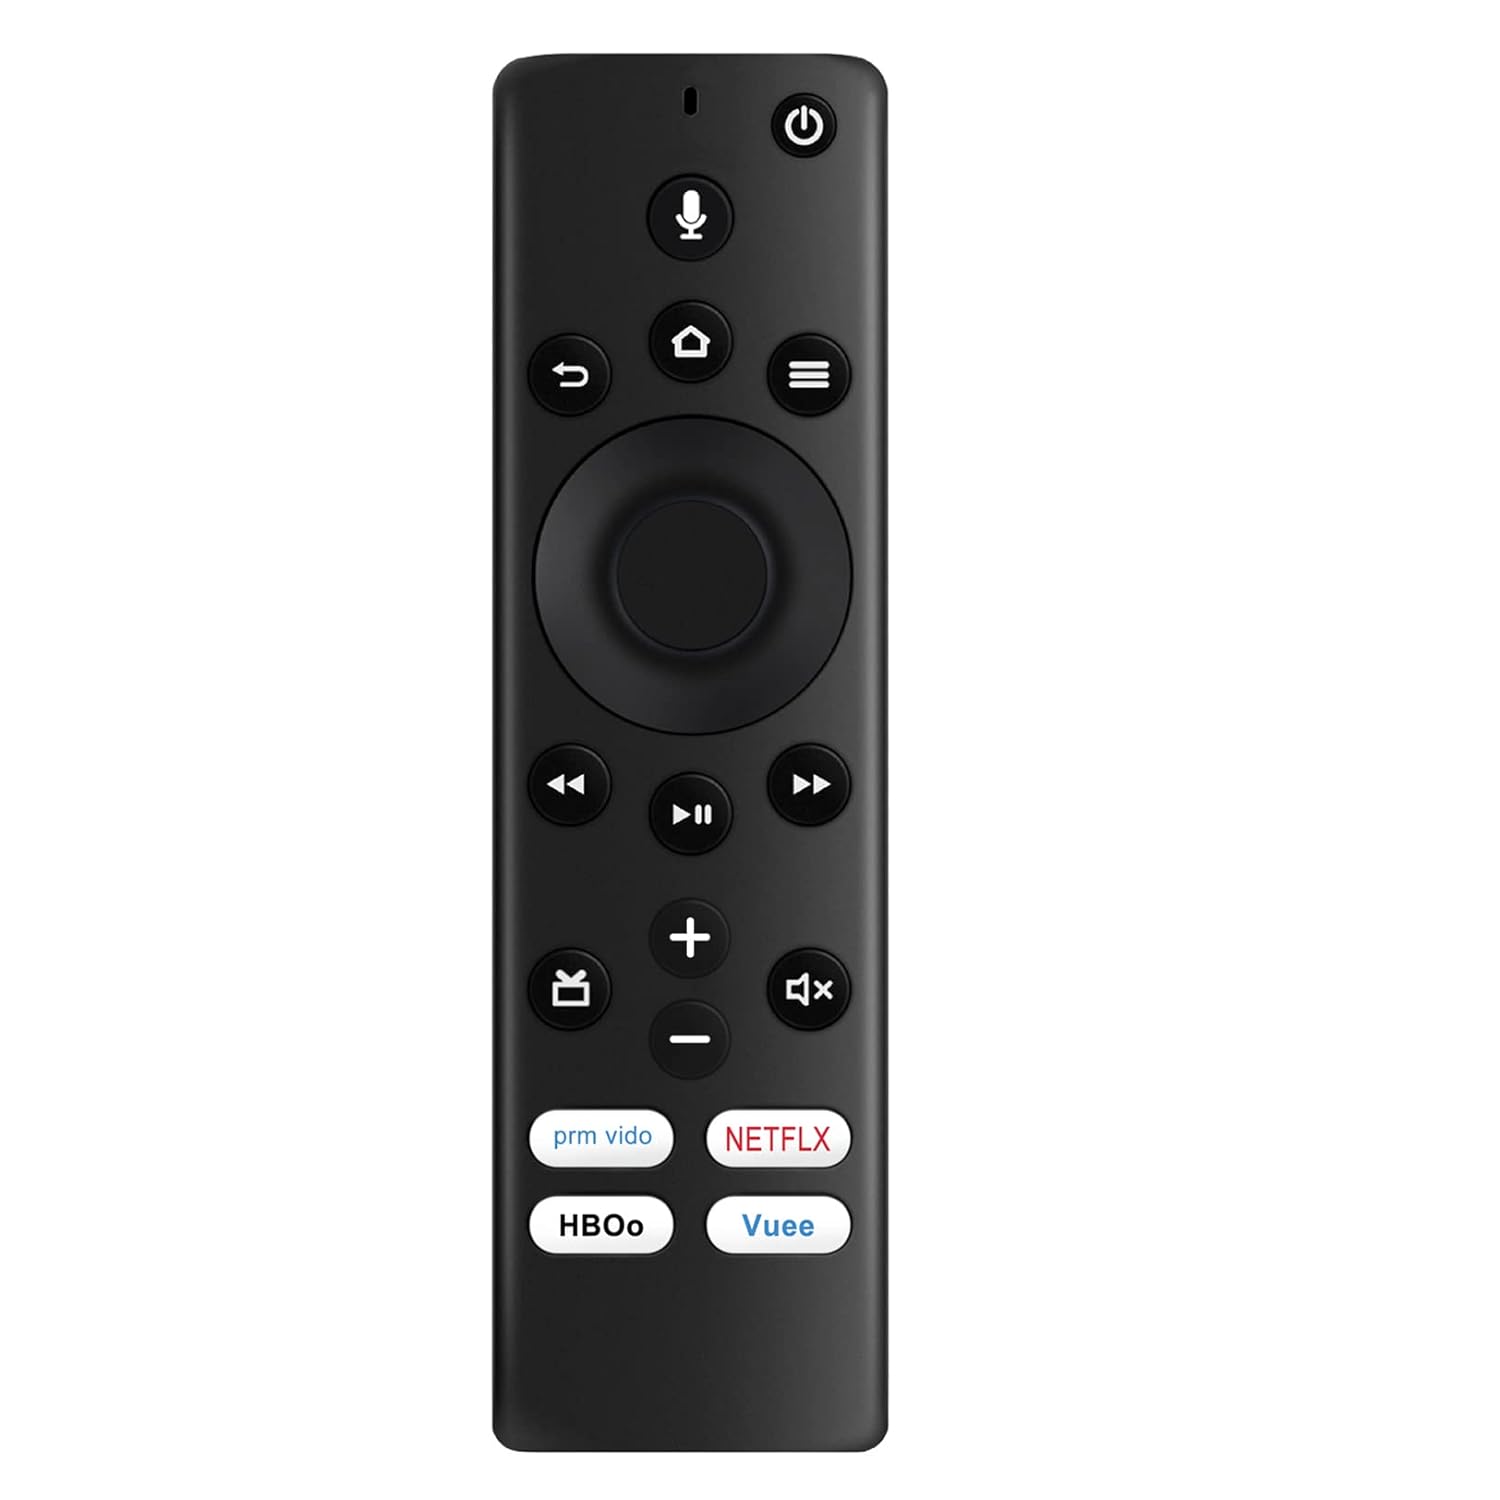 thinkstar Voice Remote Replaced Fit For Insignia And Toshiba Tv Edition Tf-50A810U19 Ns-50Df710Na19 Ns-39Df510Na19 Ns-43Df710Na19 Ns-58…